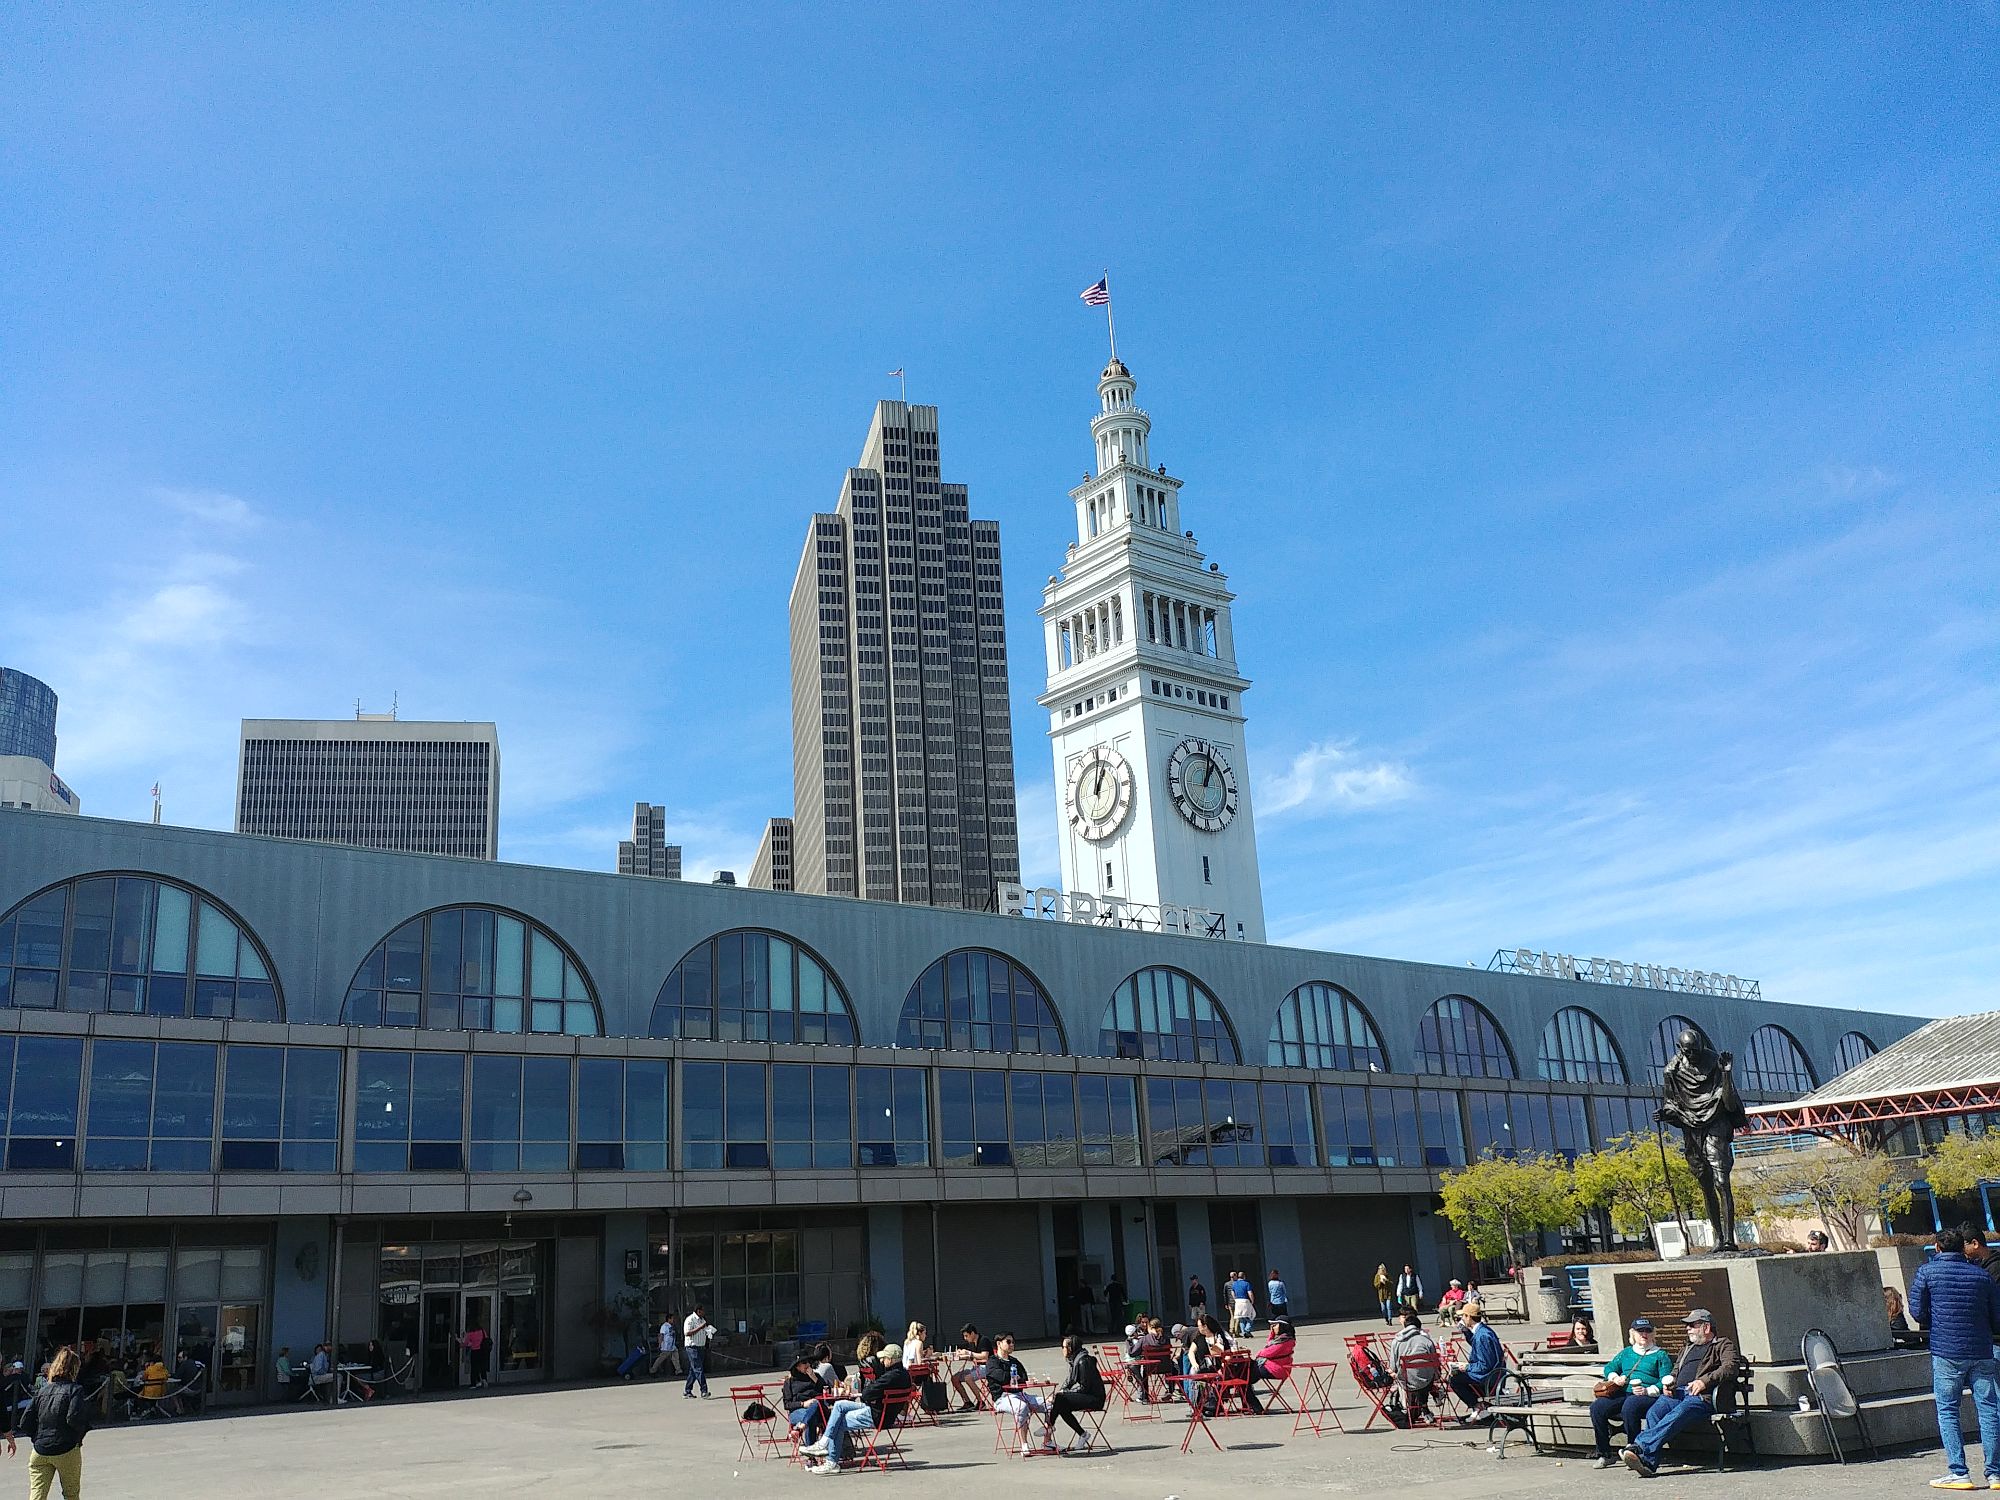 San Francisco - 02 - Ferry Building and Clock Tower